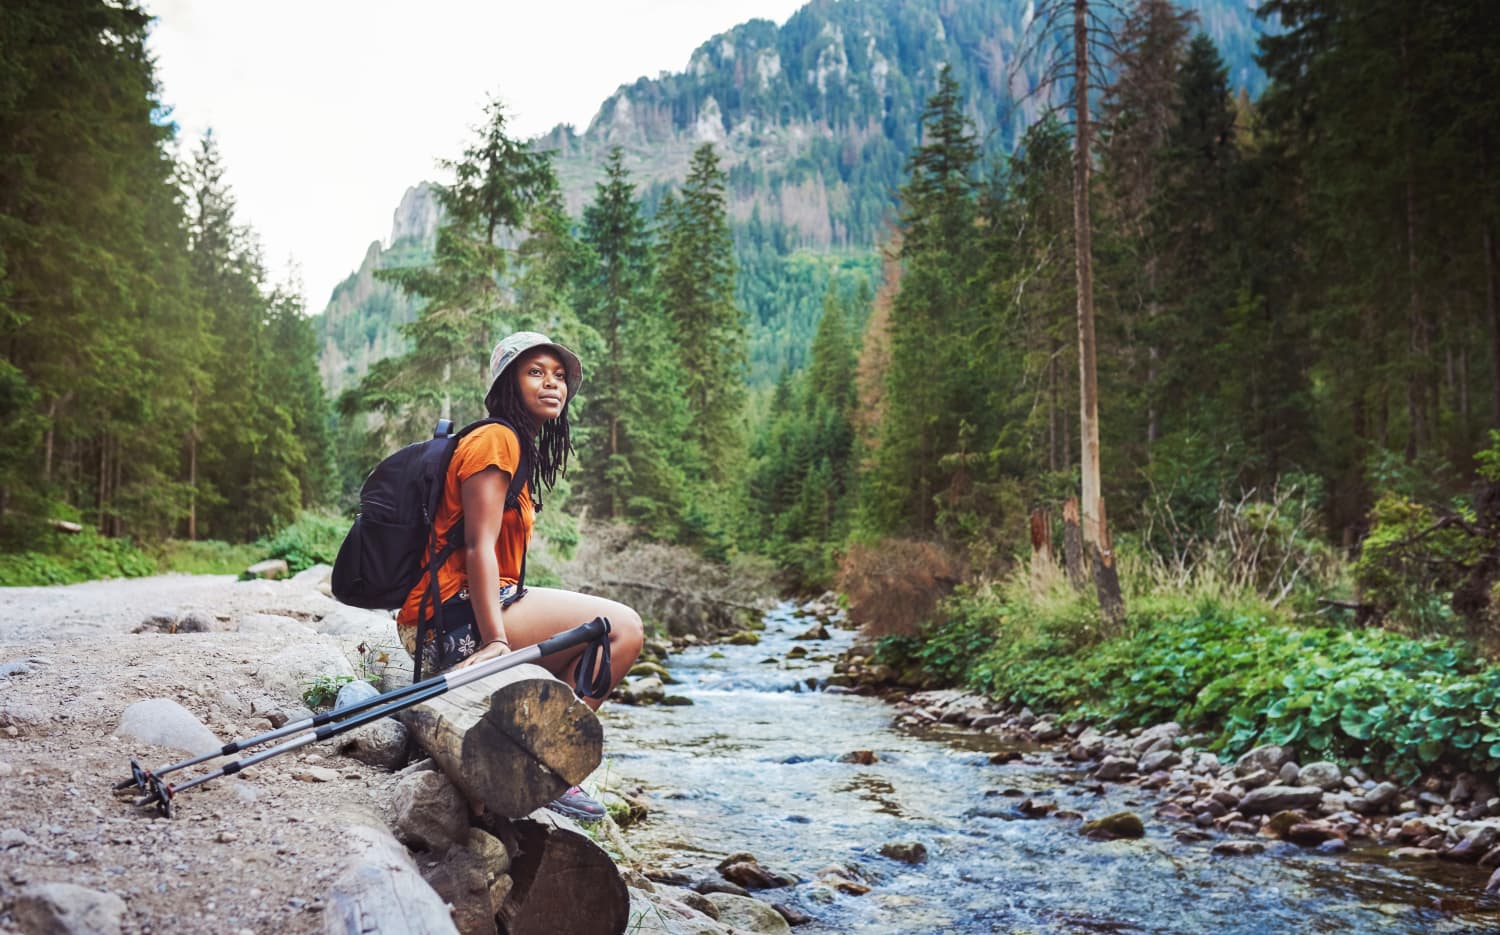 12 Hiking Essentials to Pack the Next Time You Hit the Trail